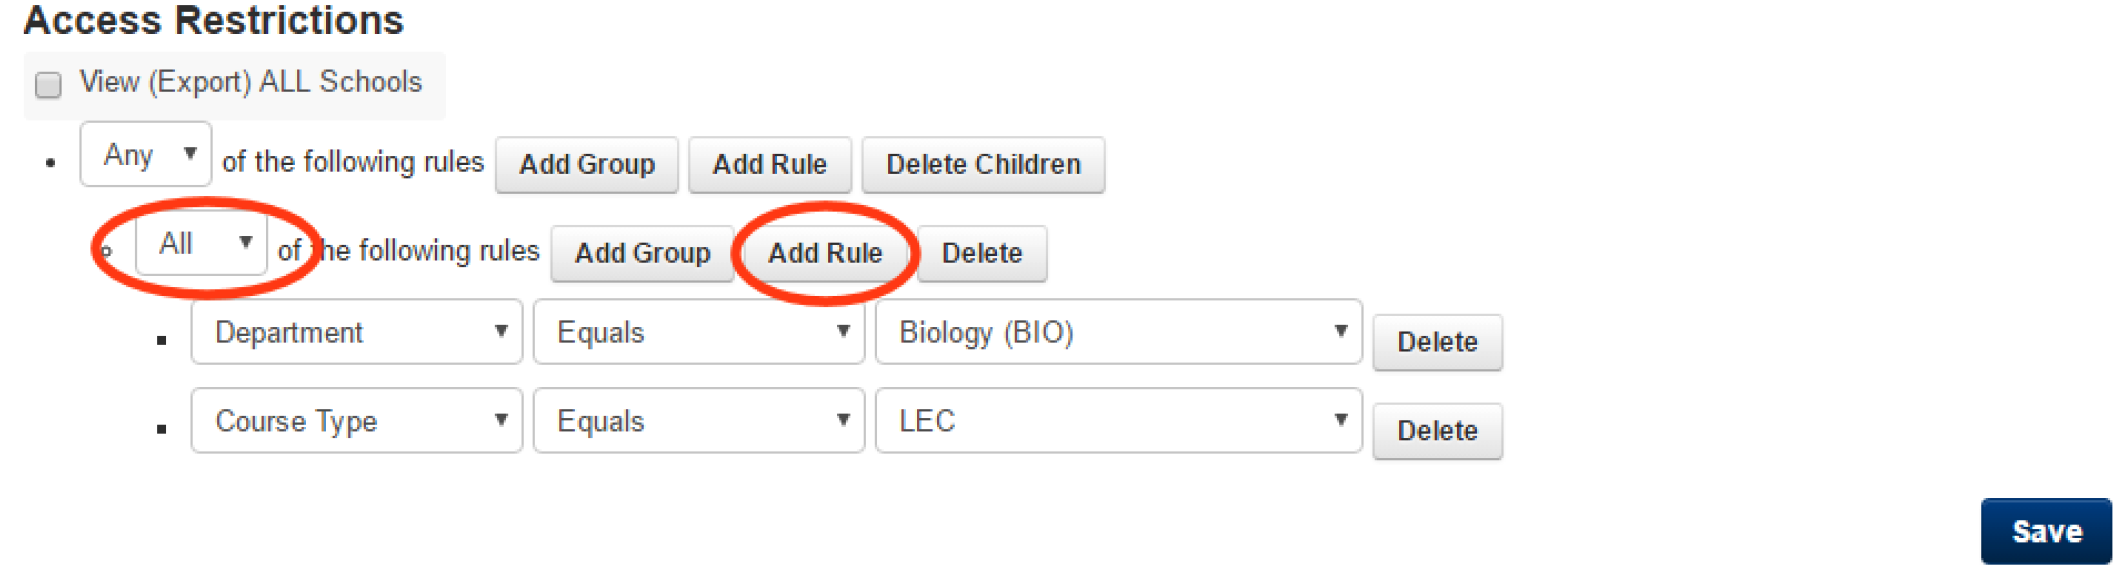 All dropdown and Add Rule button